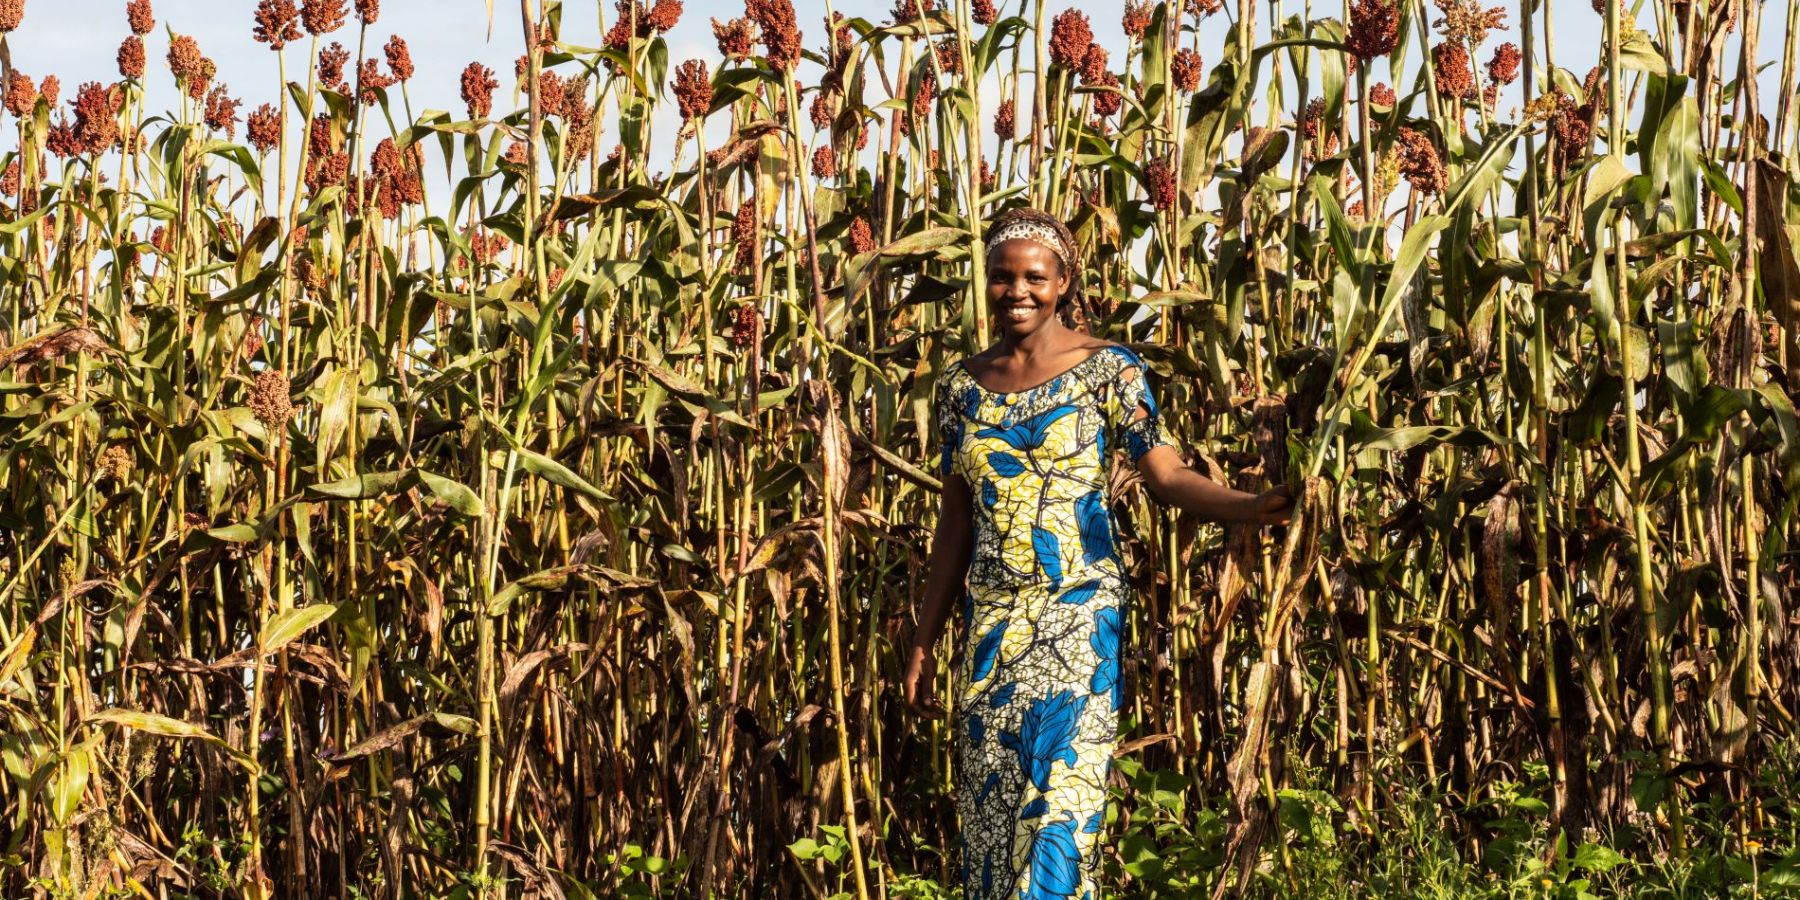 A smiling smallholder farmer stands in front of her field of tallgrowing sorghum